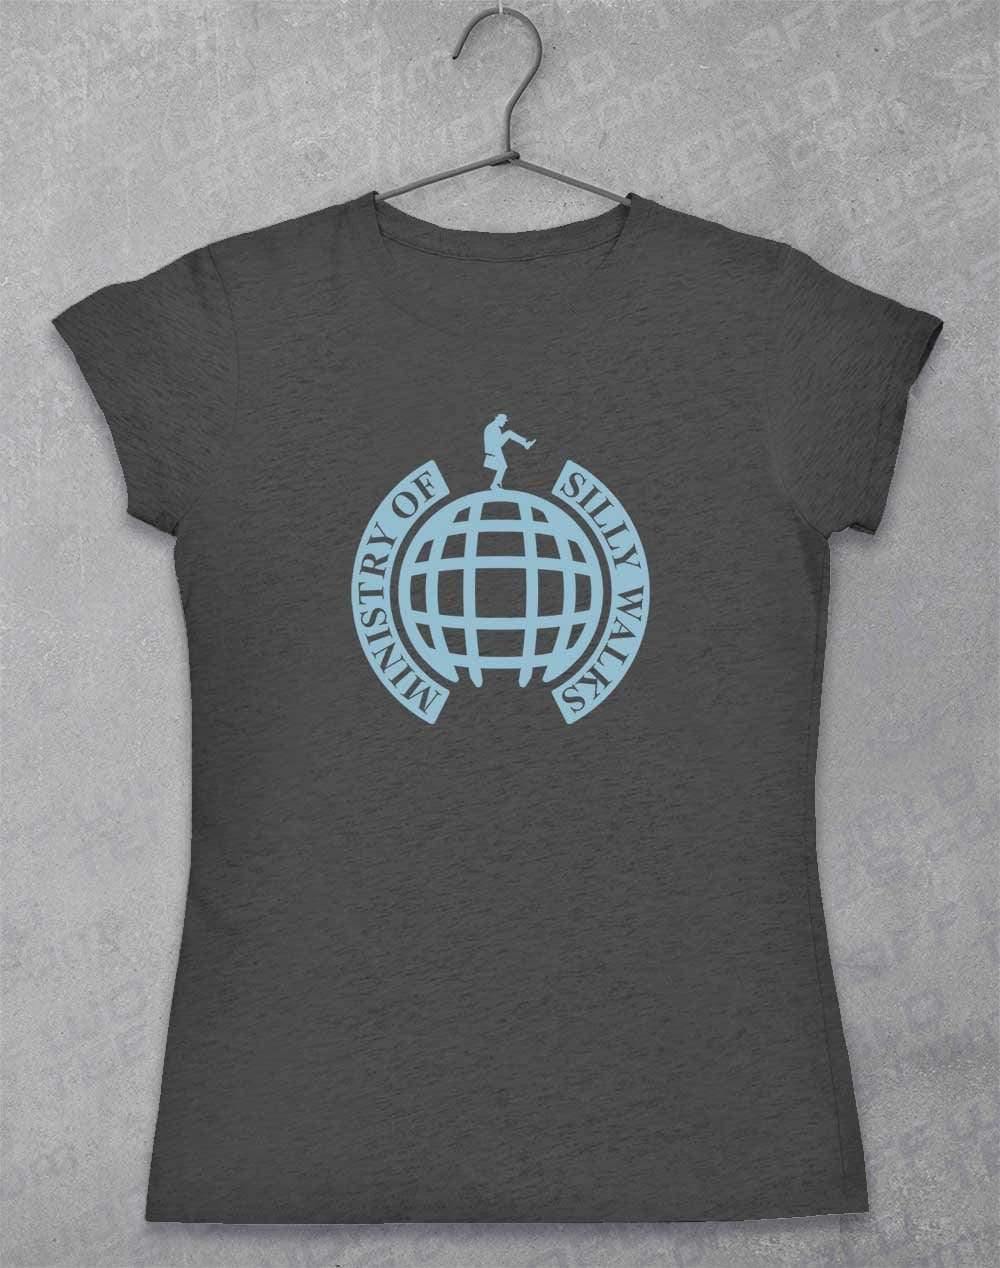 Ministry of Silly Walks Womens T-Shirt 8-10 / Dark Heather  - Off World Tees